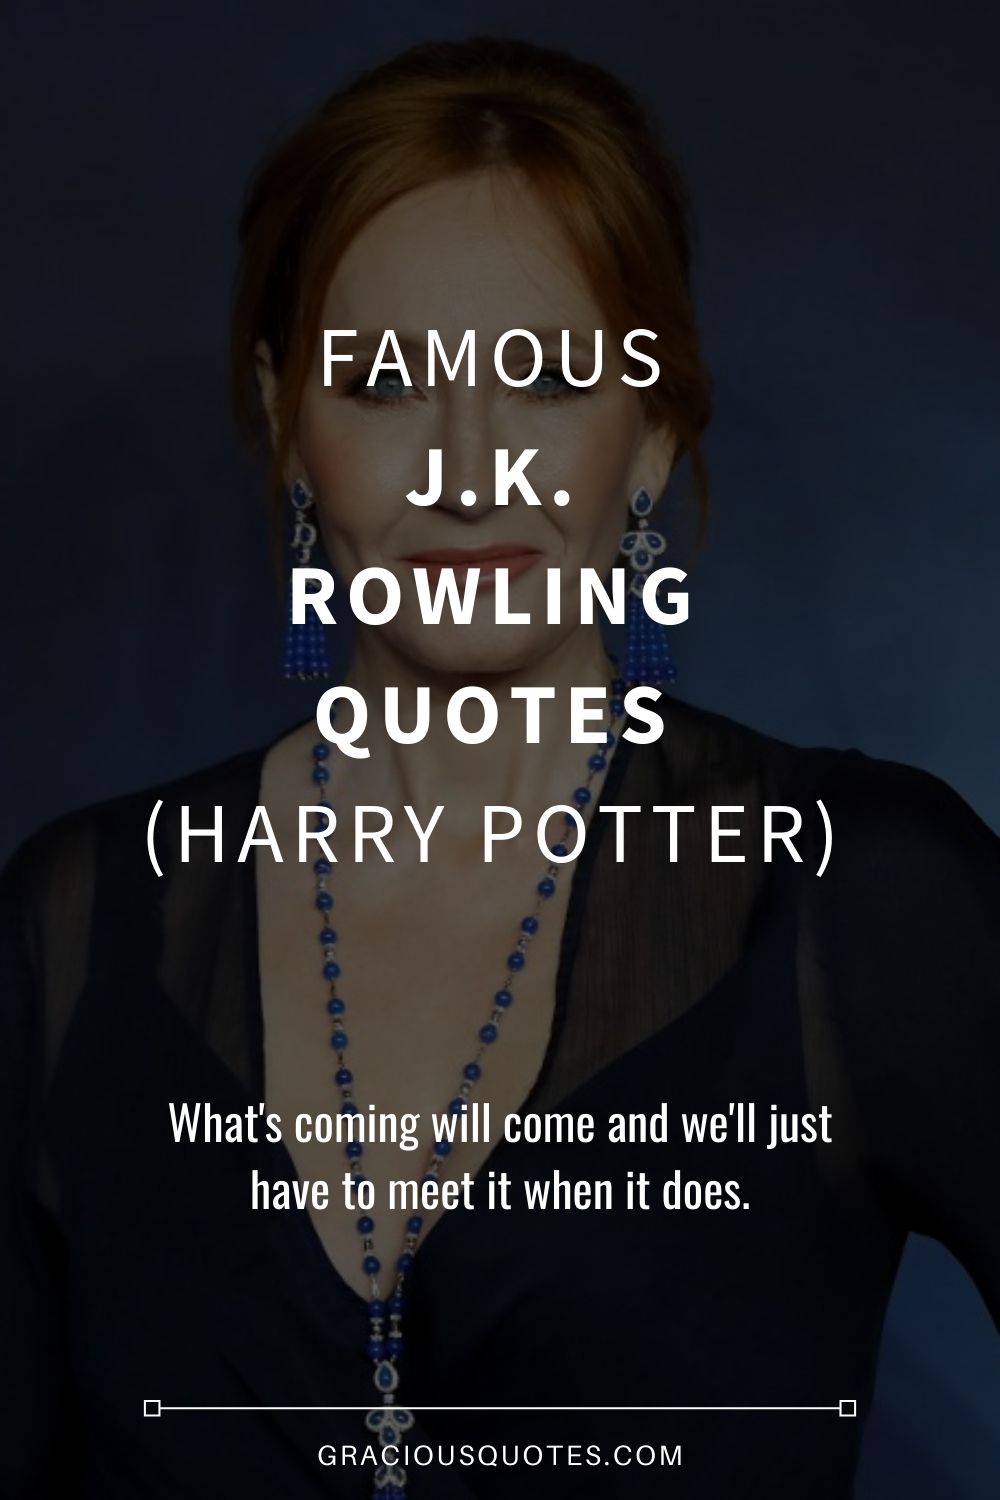 Famous J.K. Rowling Quotes (HARRY POTTER) - Gracious Quotes